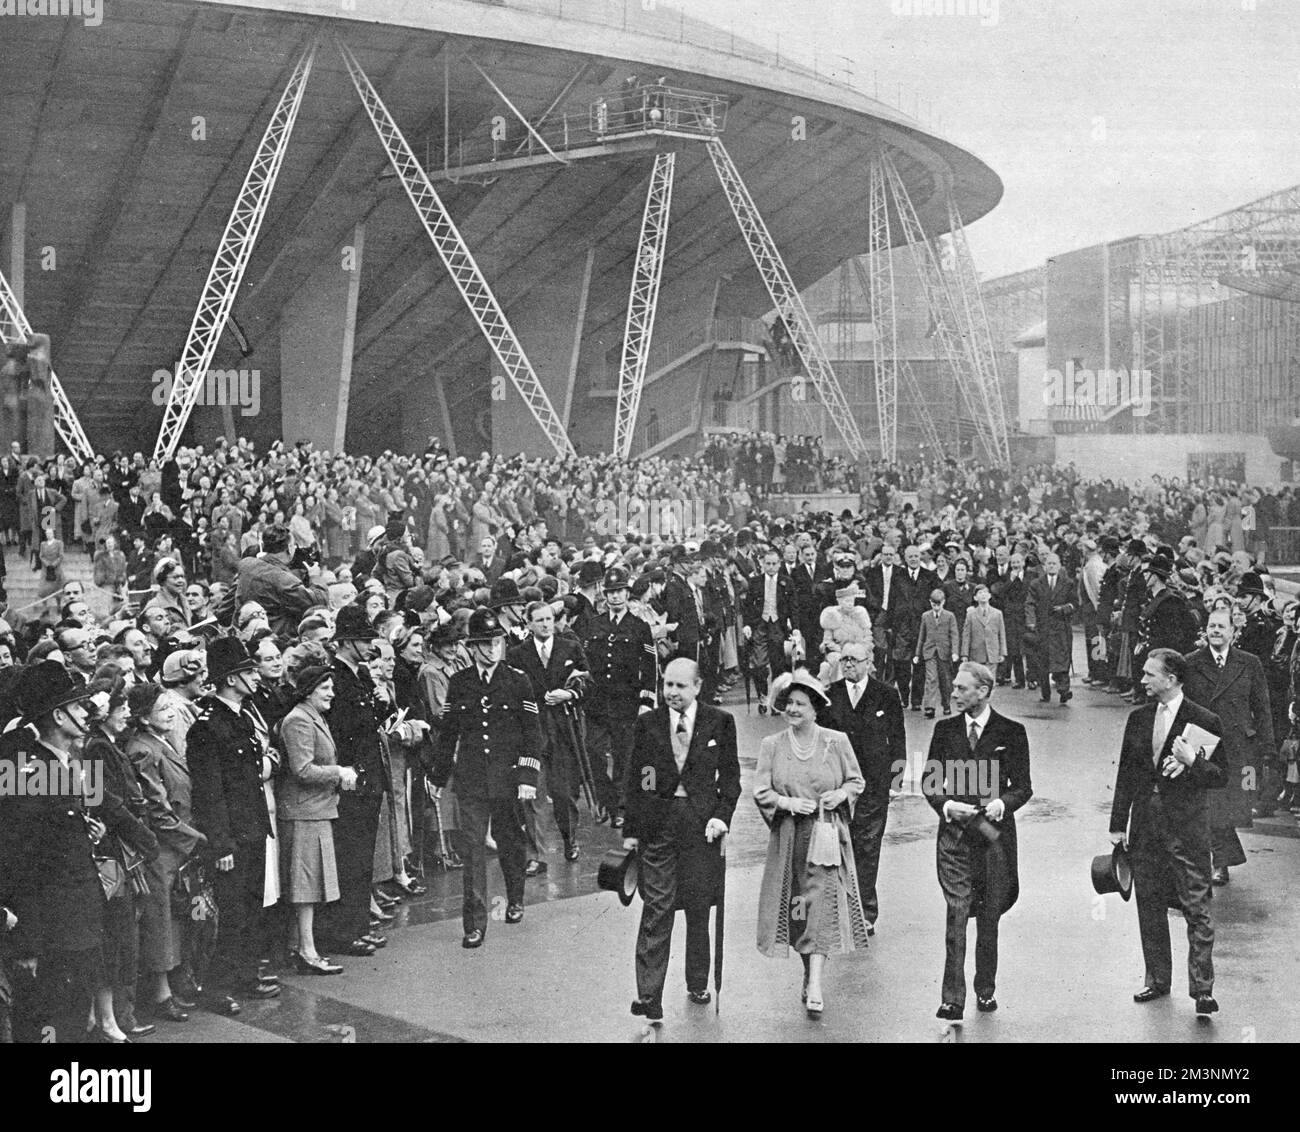 Scene at a royal visit to the Festival of Britain site on the South Bank, London.  Here King George VI and Queen Elizabeth are escorted by Gerald Barry, Director-General of the festival, followed by Herbert Morrison, Queen Mary (in a wheelchair), and other members of the royal family, watched by a large crowd of people.  The large building towering above them is the Dome of Discovery.        Date: 4 May 1951 Stock Photo